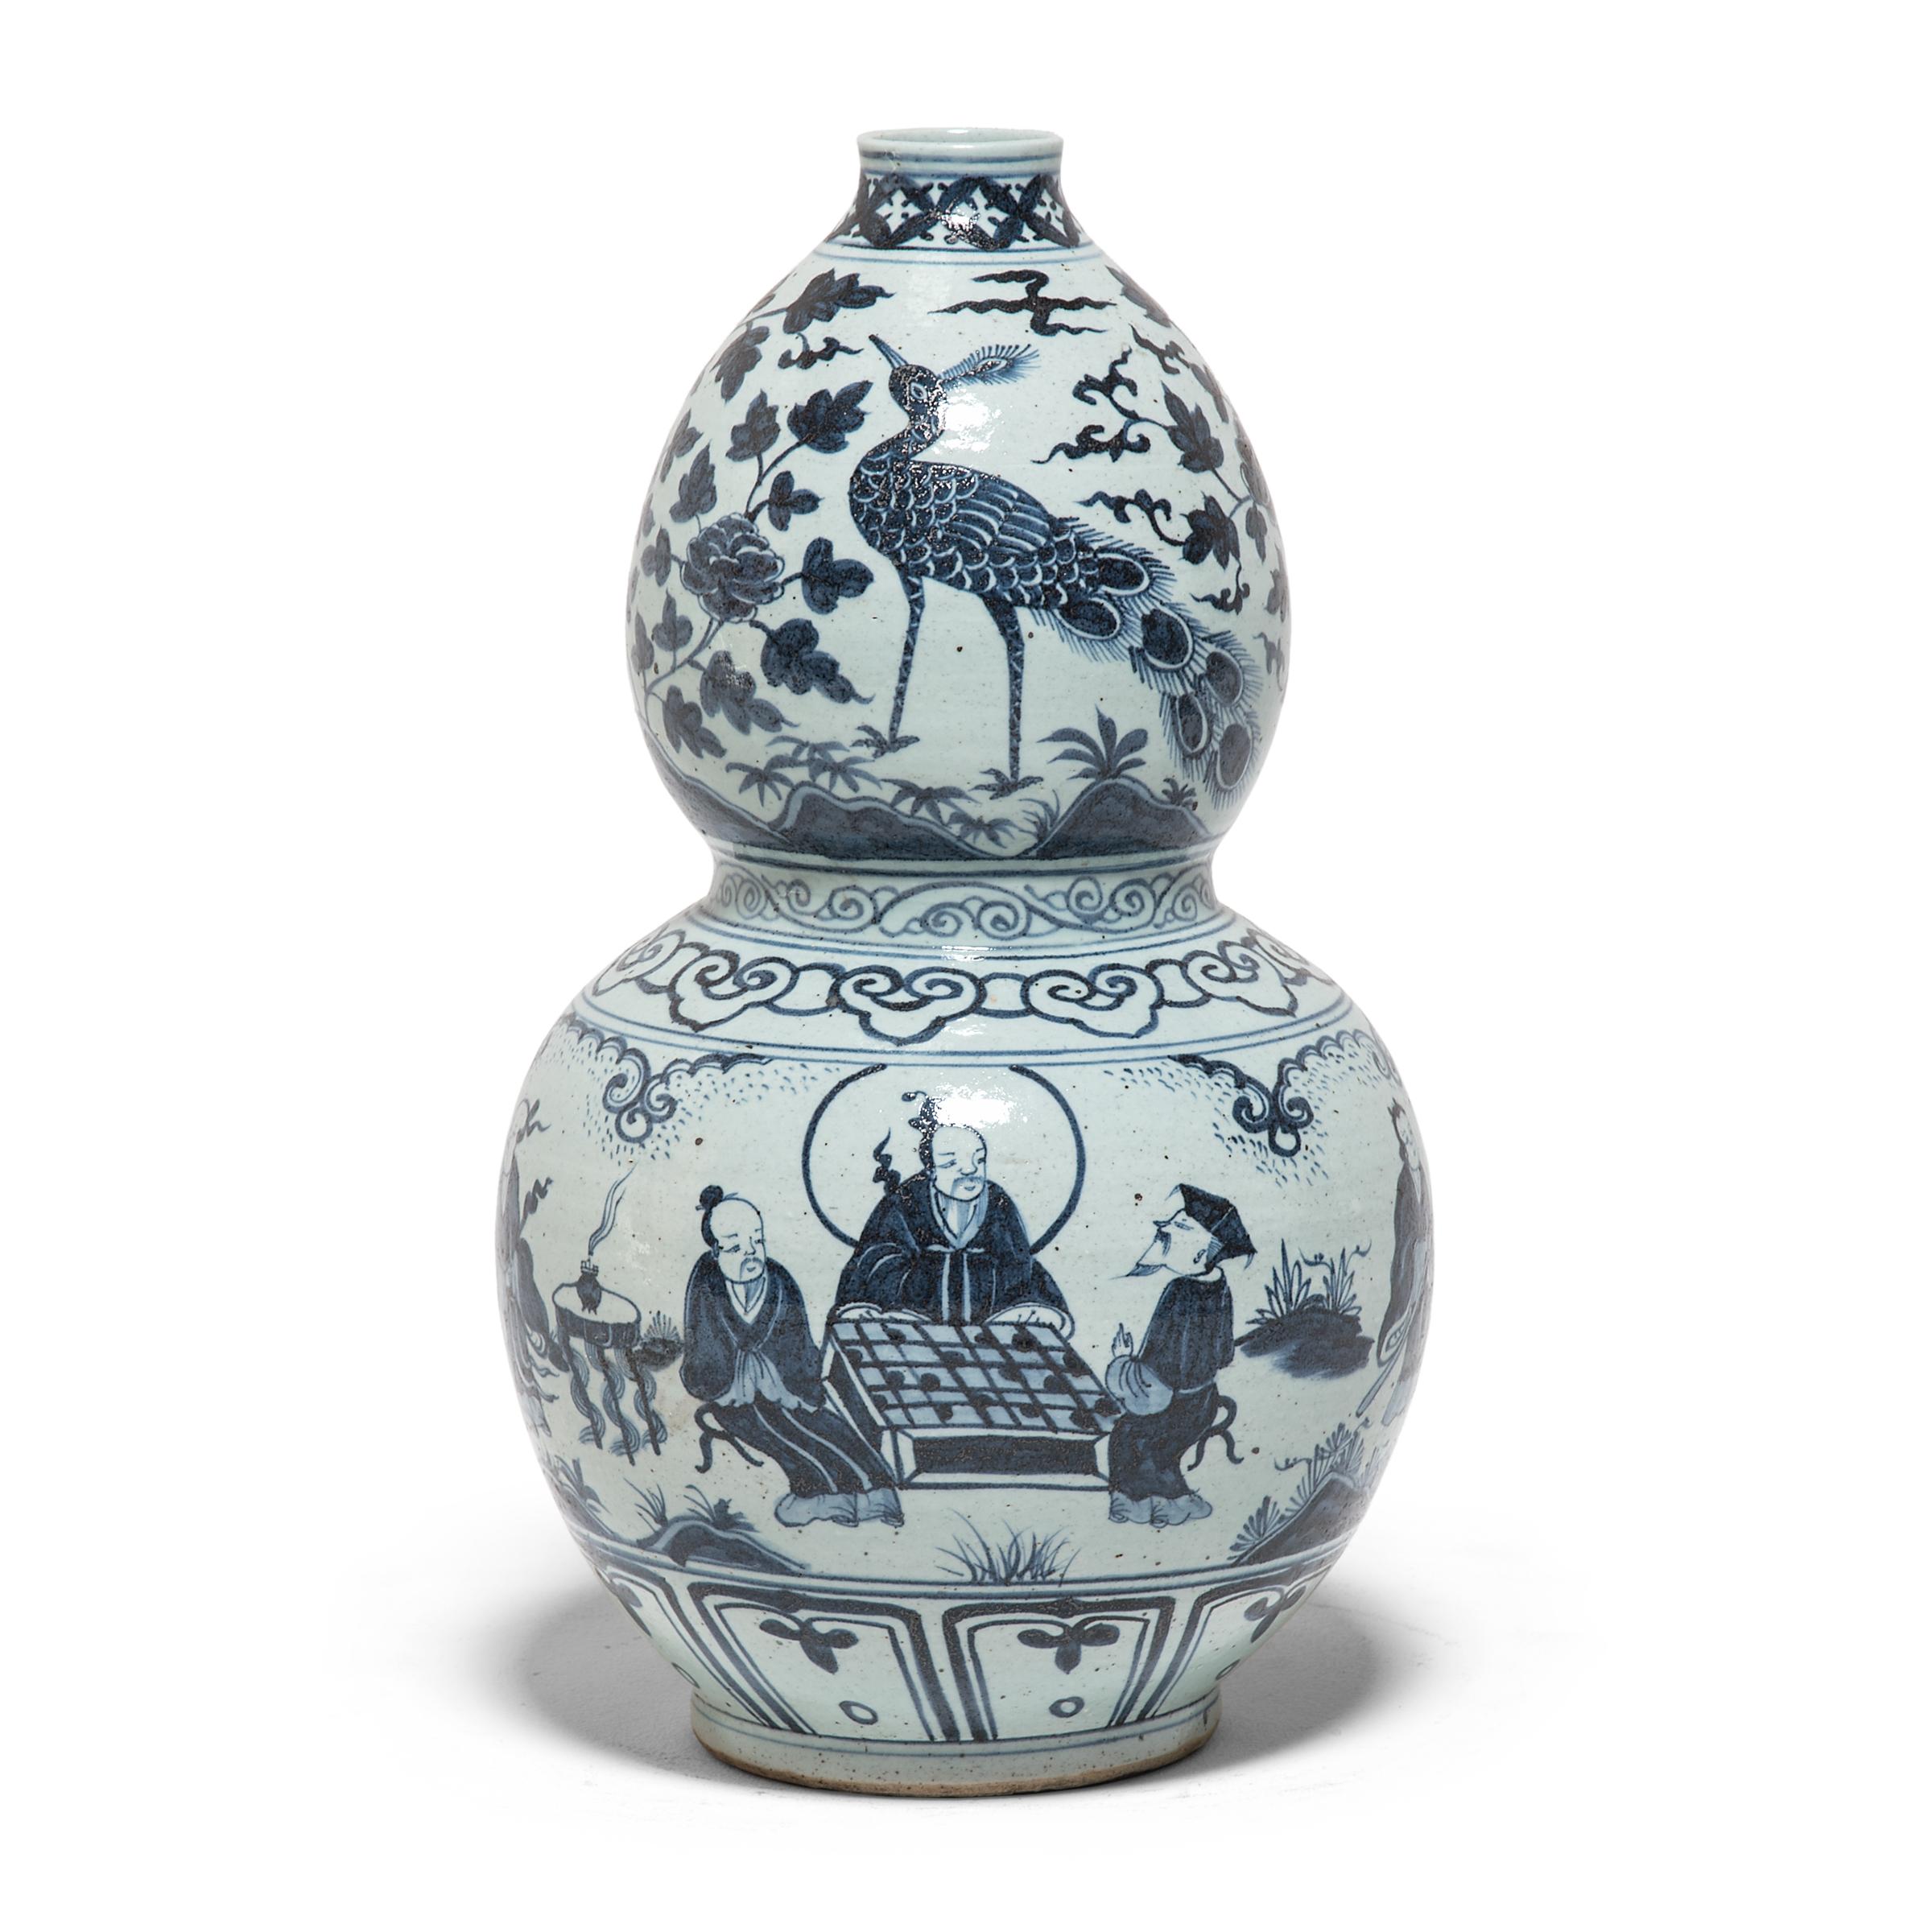 Working within the time-honored tradition of blue-and-white porcelain, artisans from China's Jiangxi province painted this pair of contemporary double-gourd vases with scenes from a wondrous scholar’s garden. Using the porcelain vessel’s hourglass